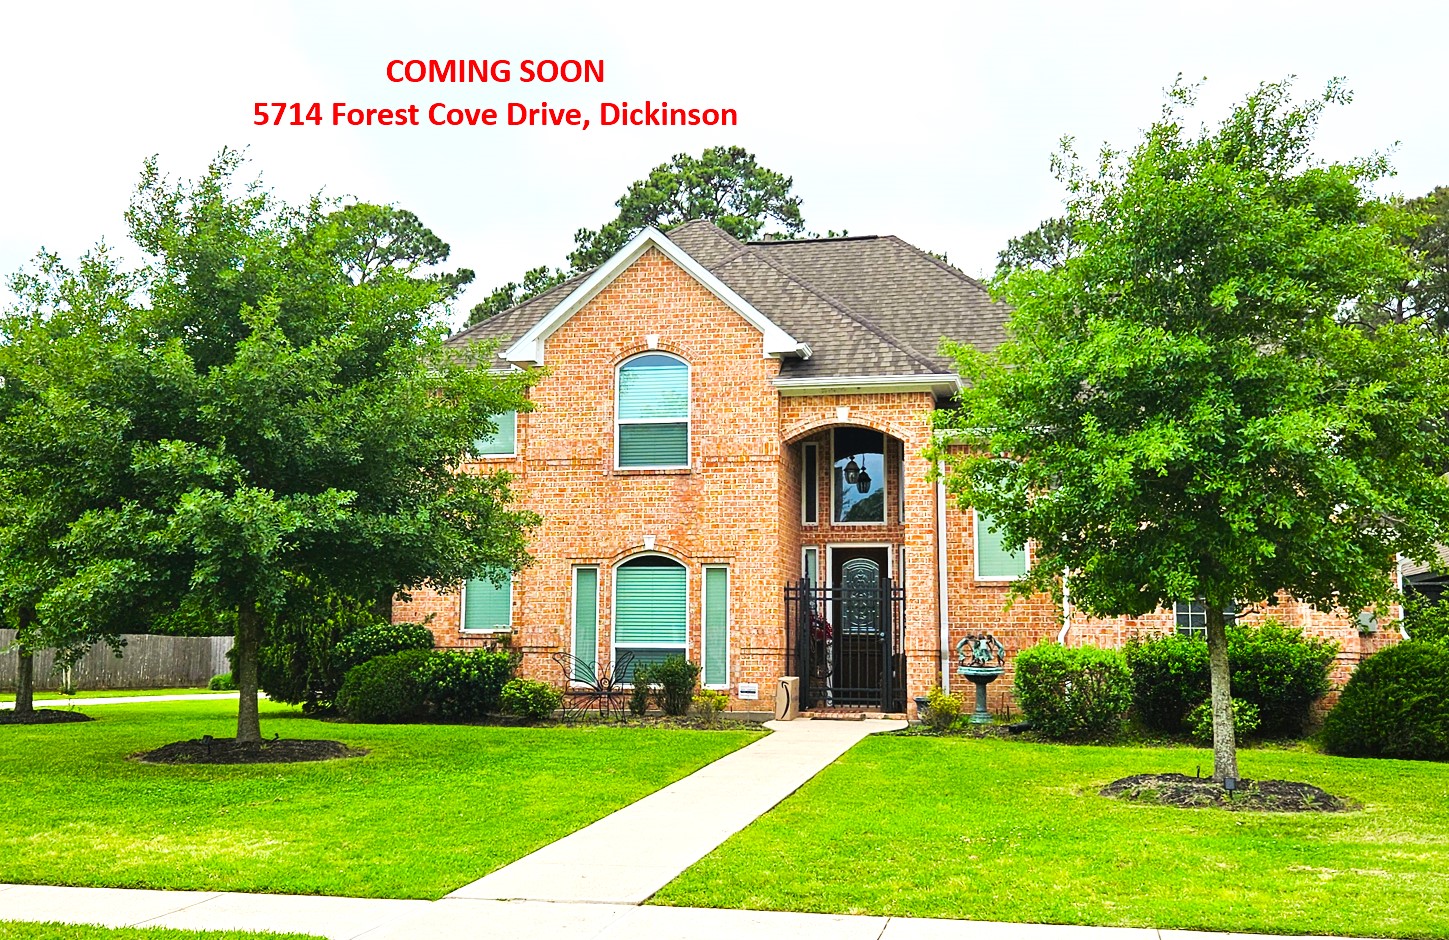 5714 Forest Cove - Coming Soon 1